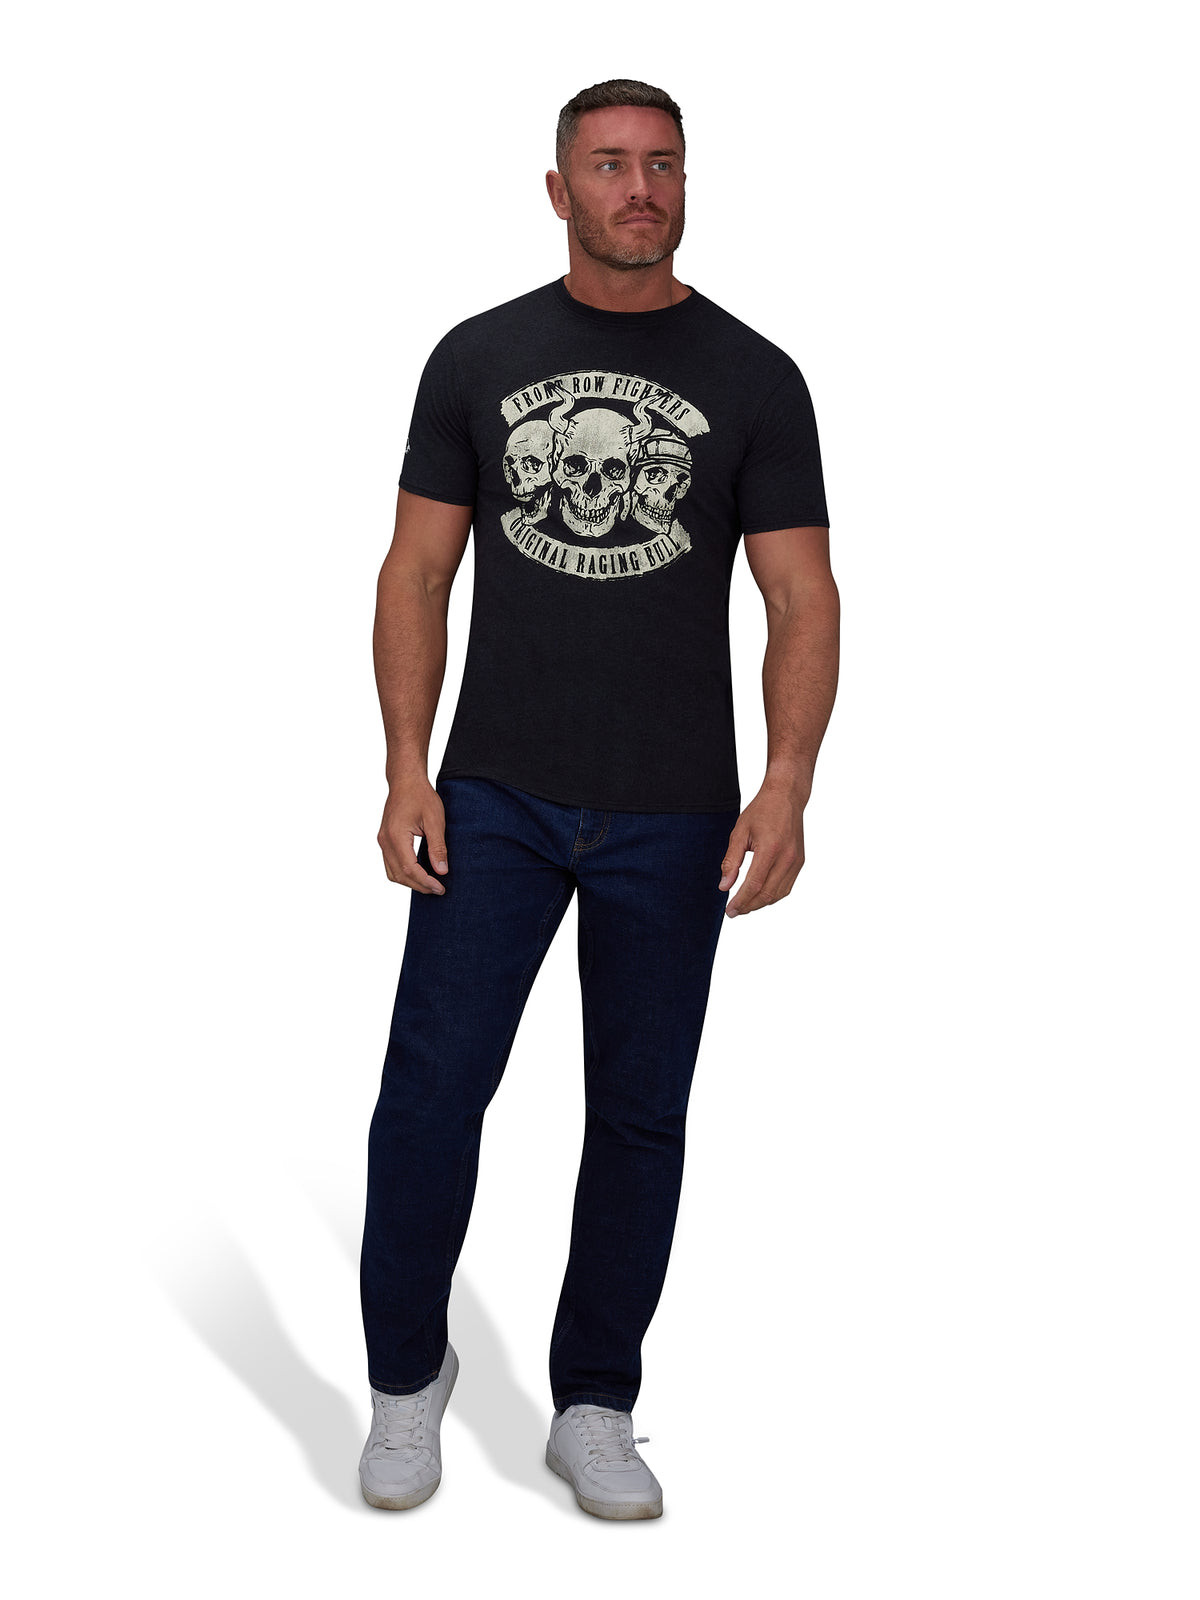 Front Row Fighters T-Shirt - Black